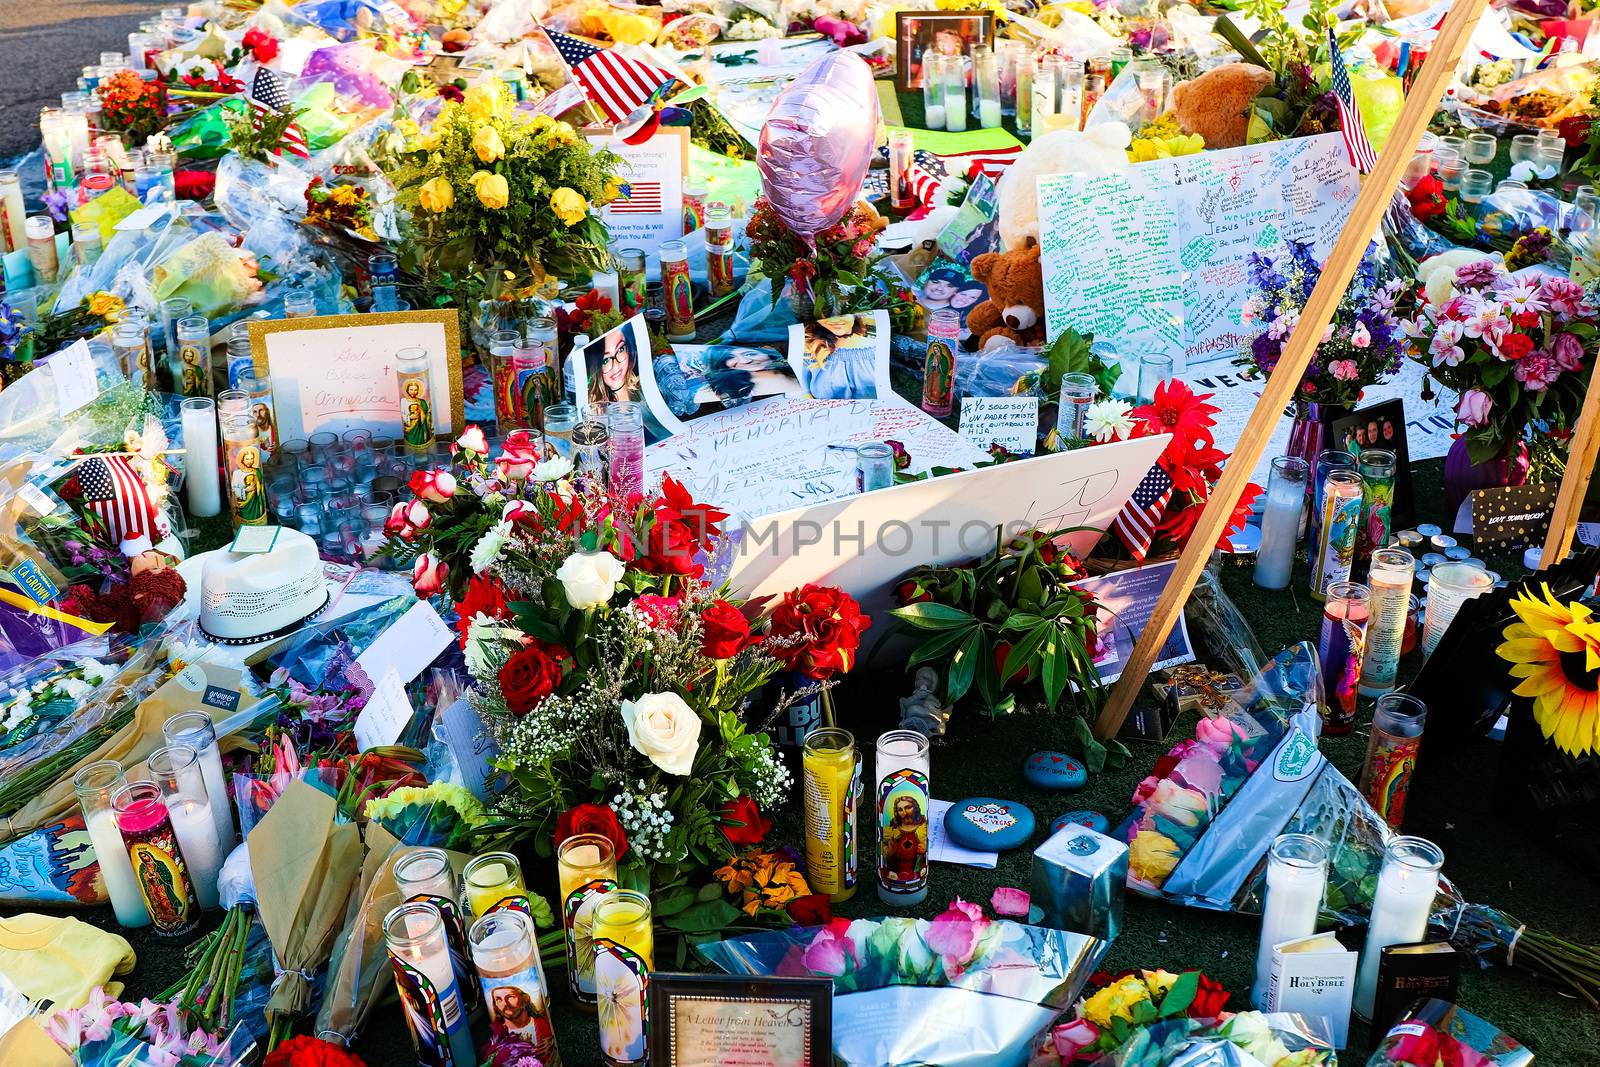 Las Vegas,NV/USA - Oct 07 ,2017 : Memorial Message of the Las Vegas gun shooting victims on the Las Vegas Strip Near the Mandalay Bay. In memory of the 58 victims from the 1 October,2017 shooting.